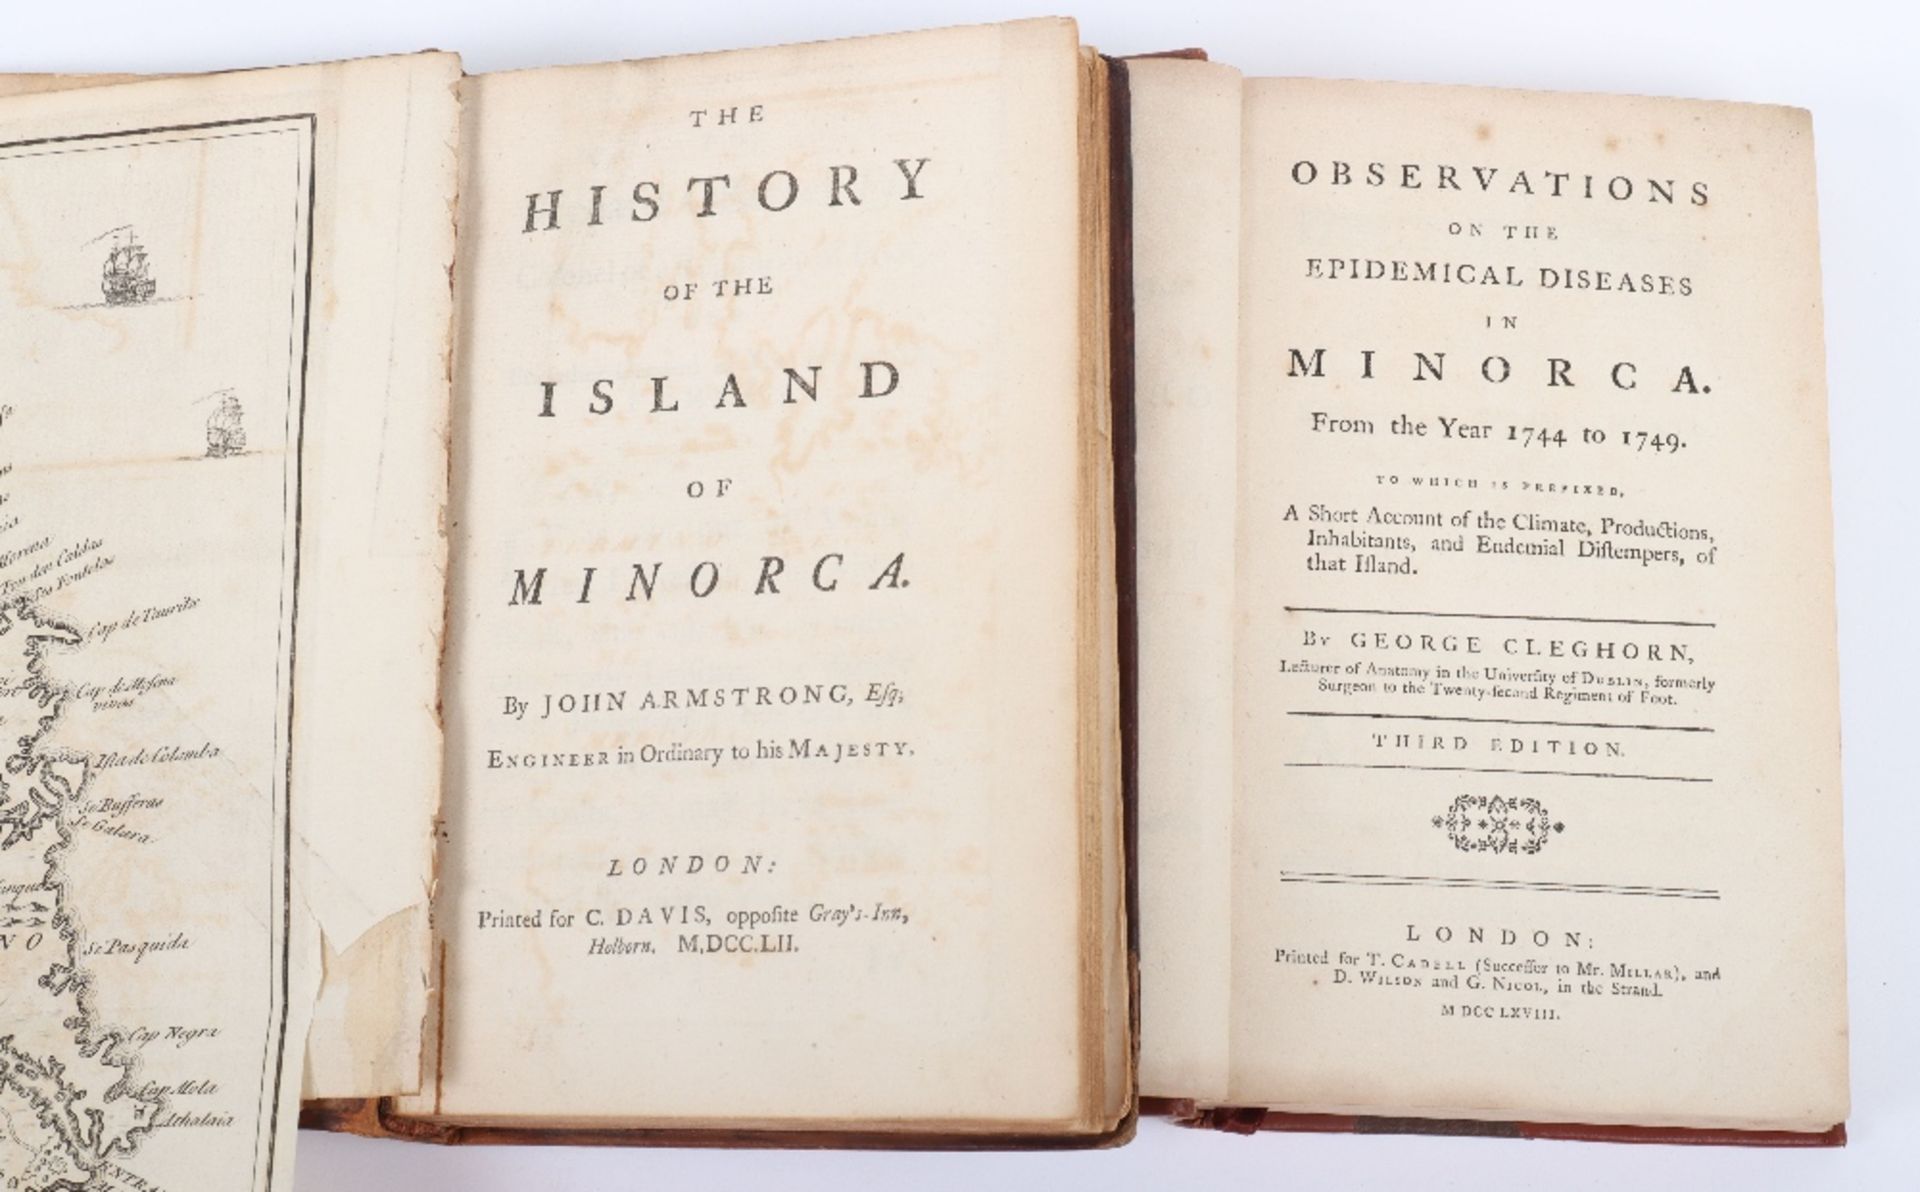 Collection of Early and Interesting Books on the History of Minorca - Image 9 of 9